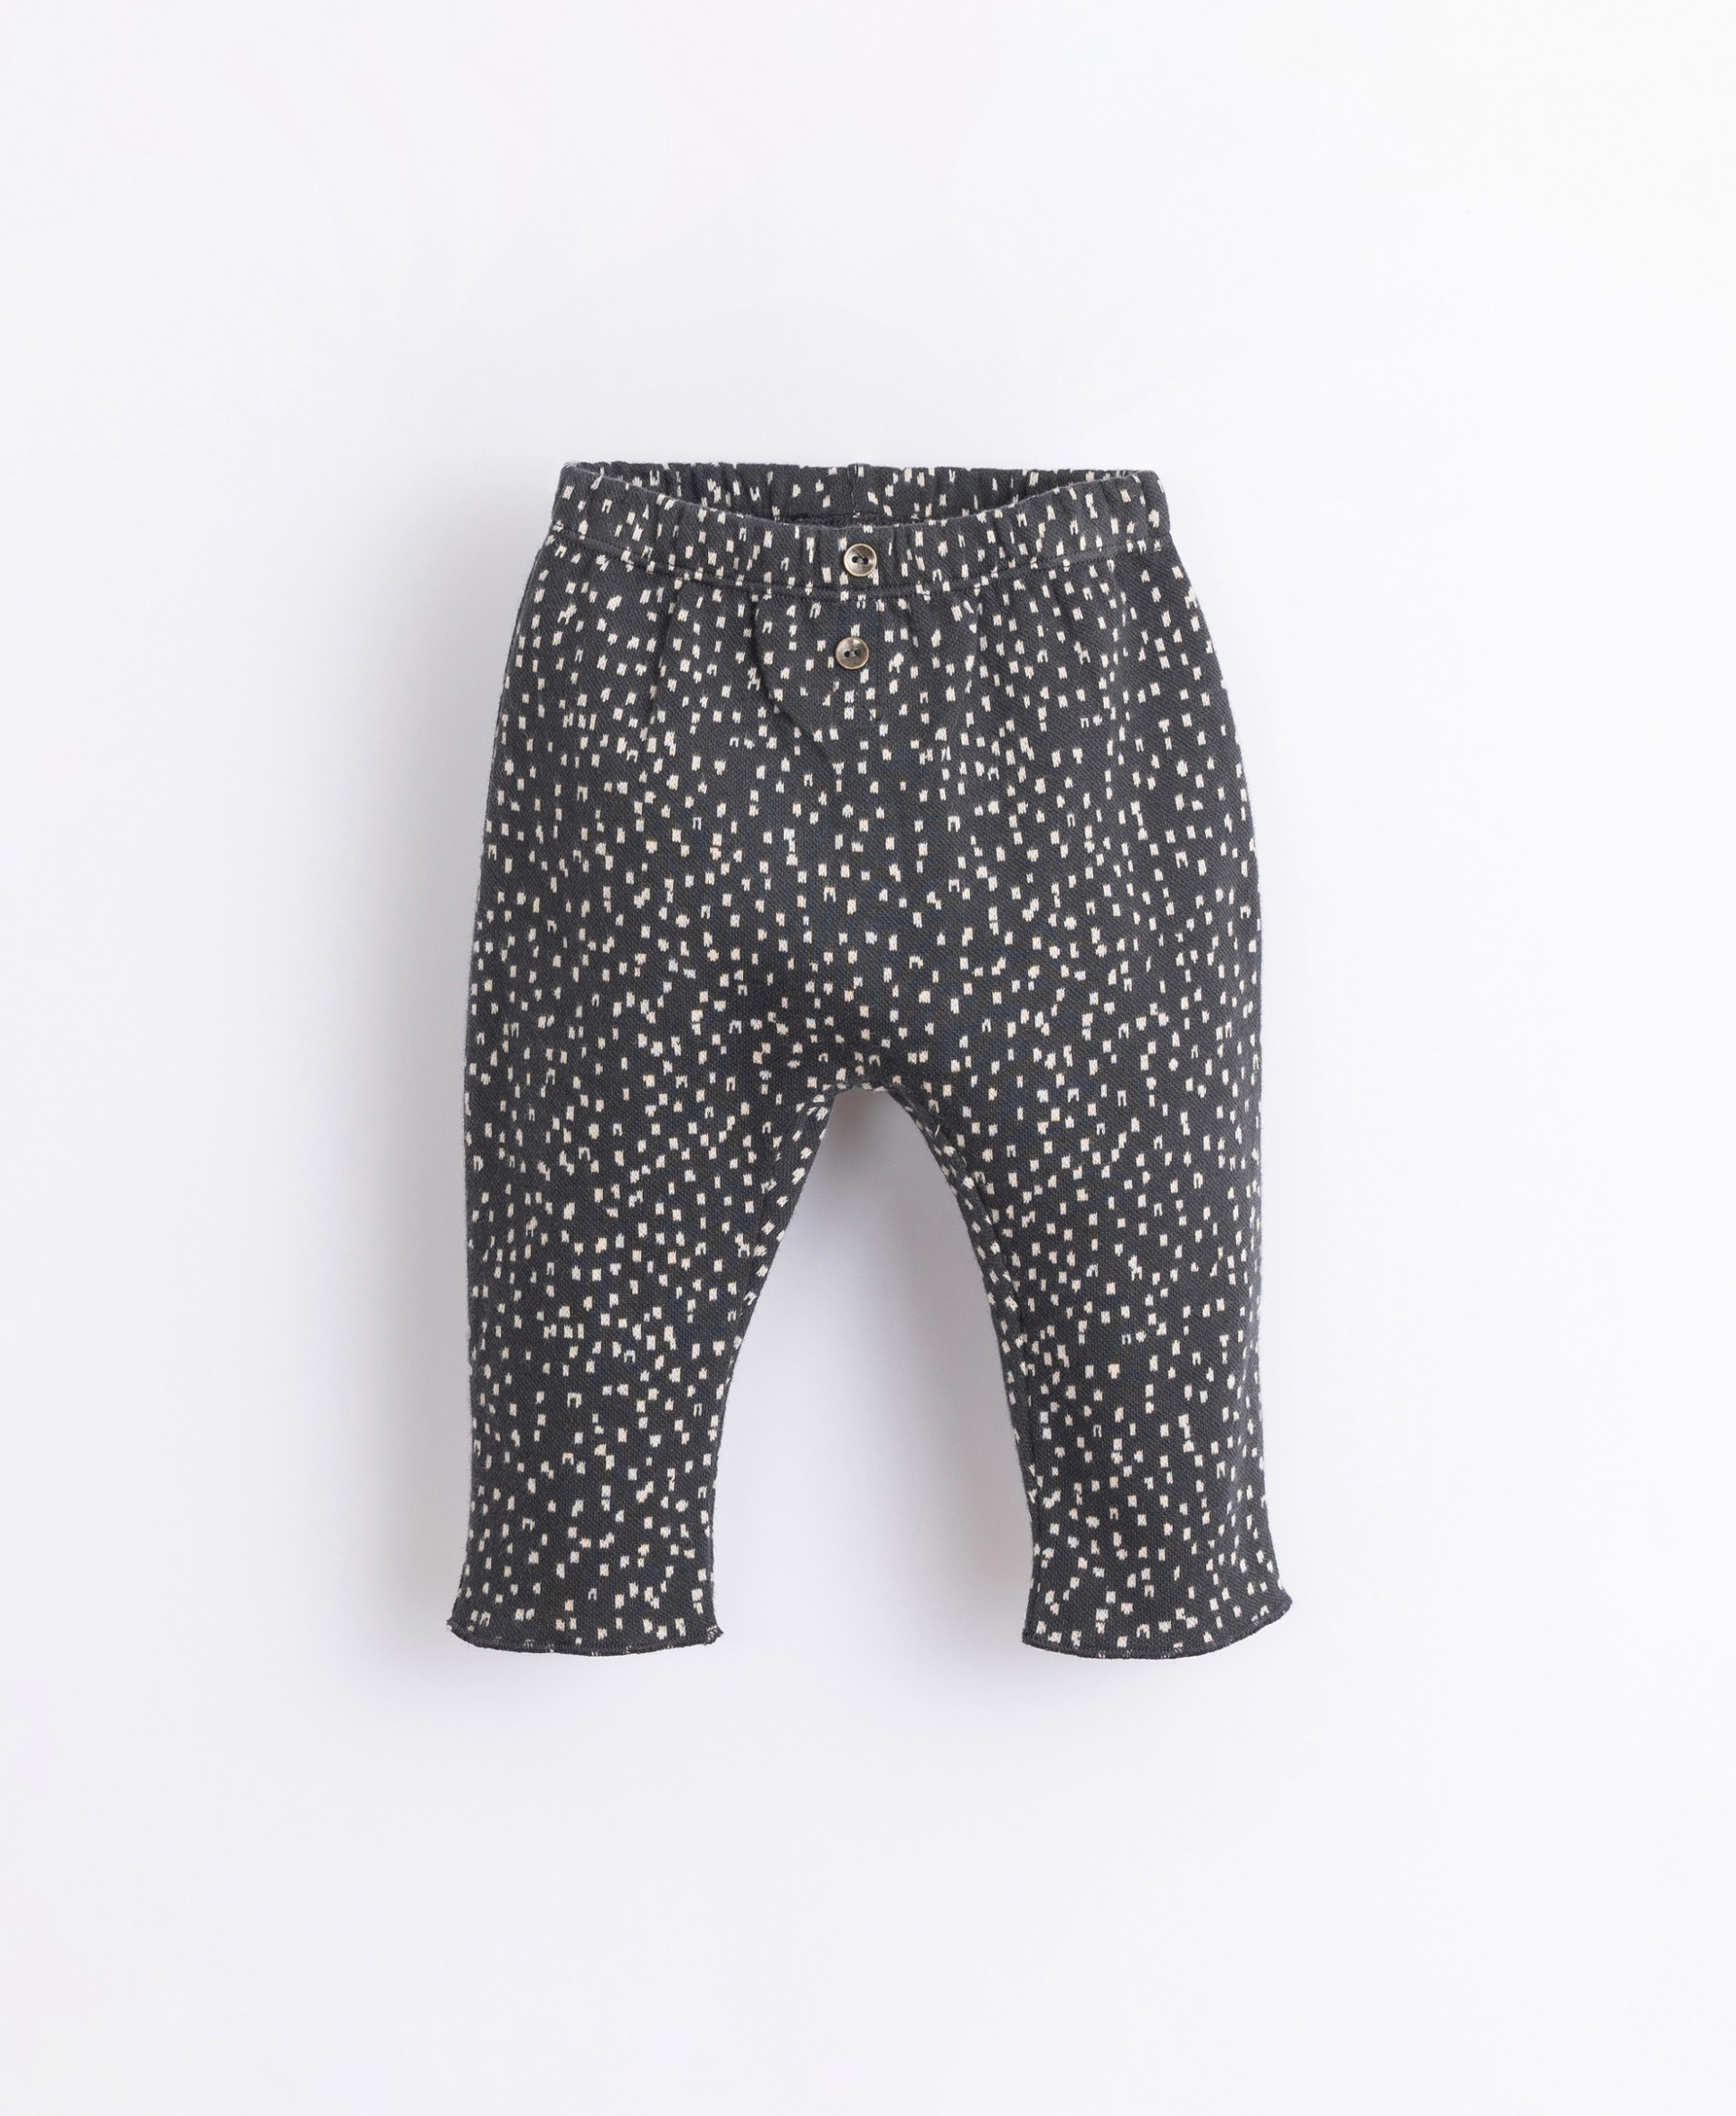 Printed trousers with decorative buttons | Illustration